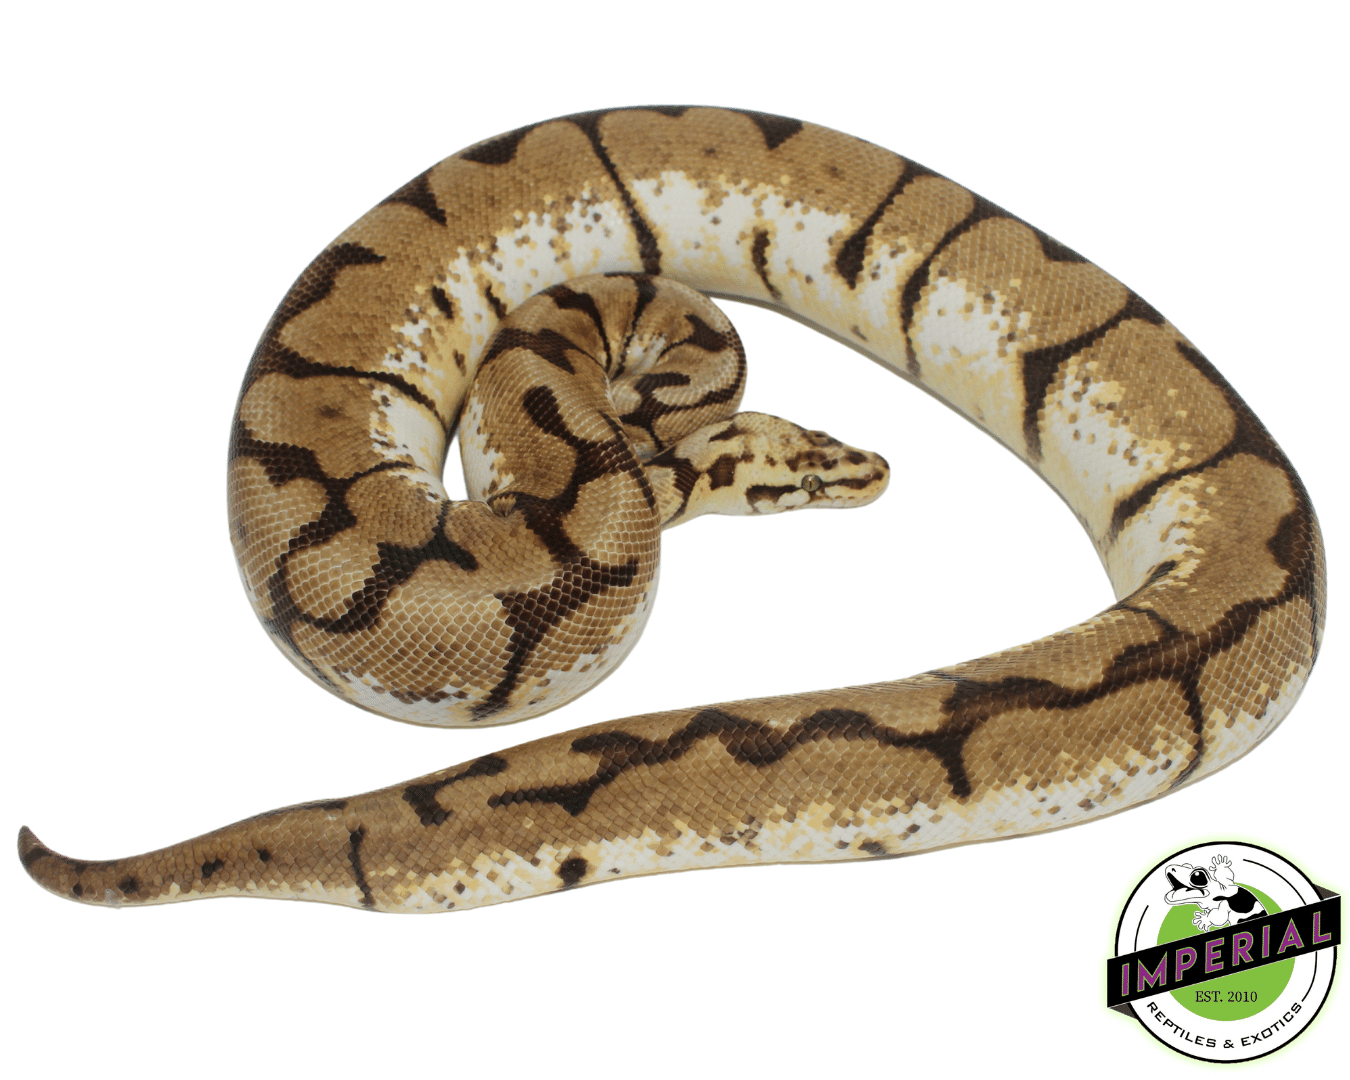 bumble bee adult female ball python for sale, buy reptiles online